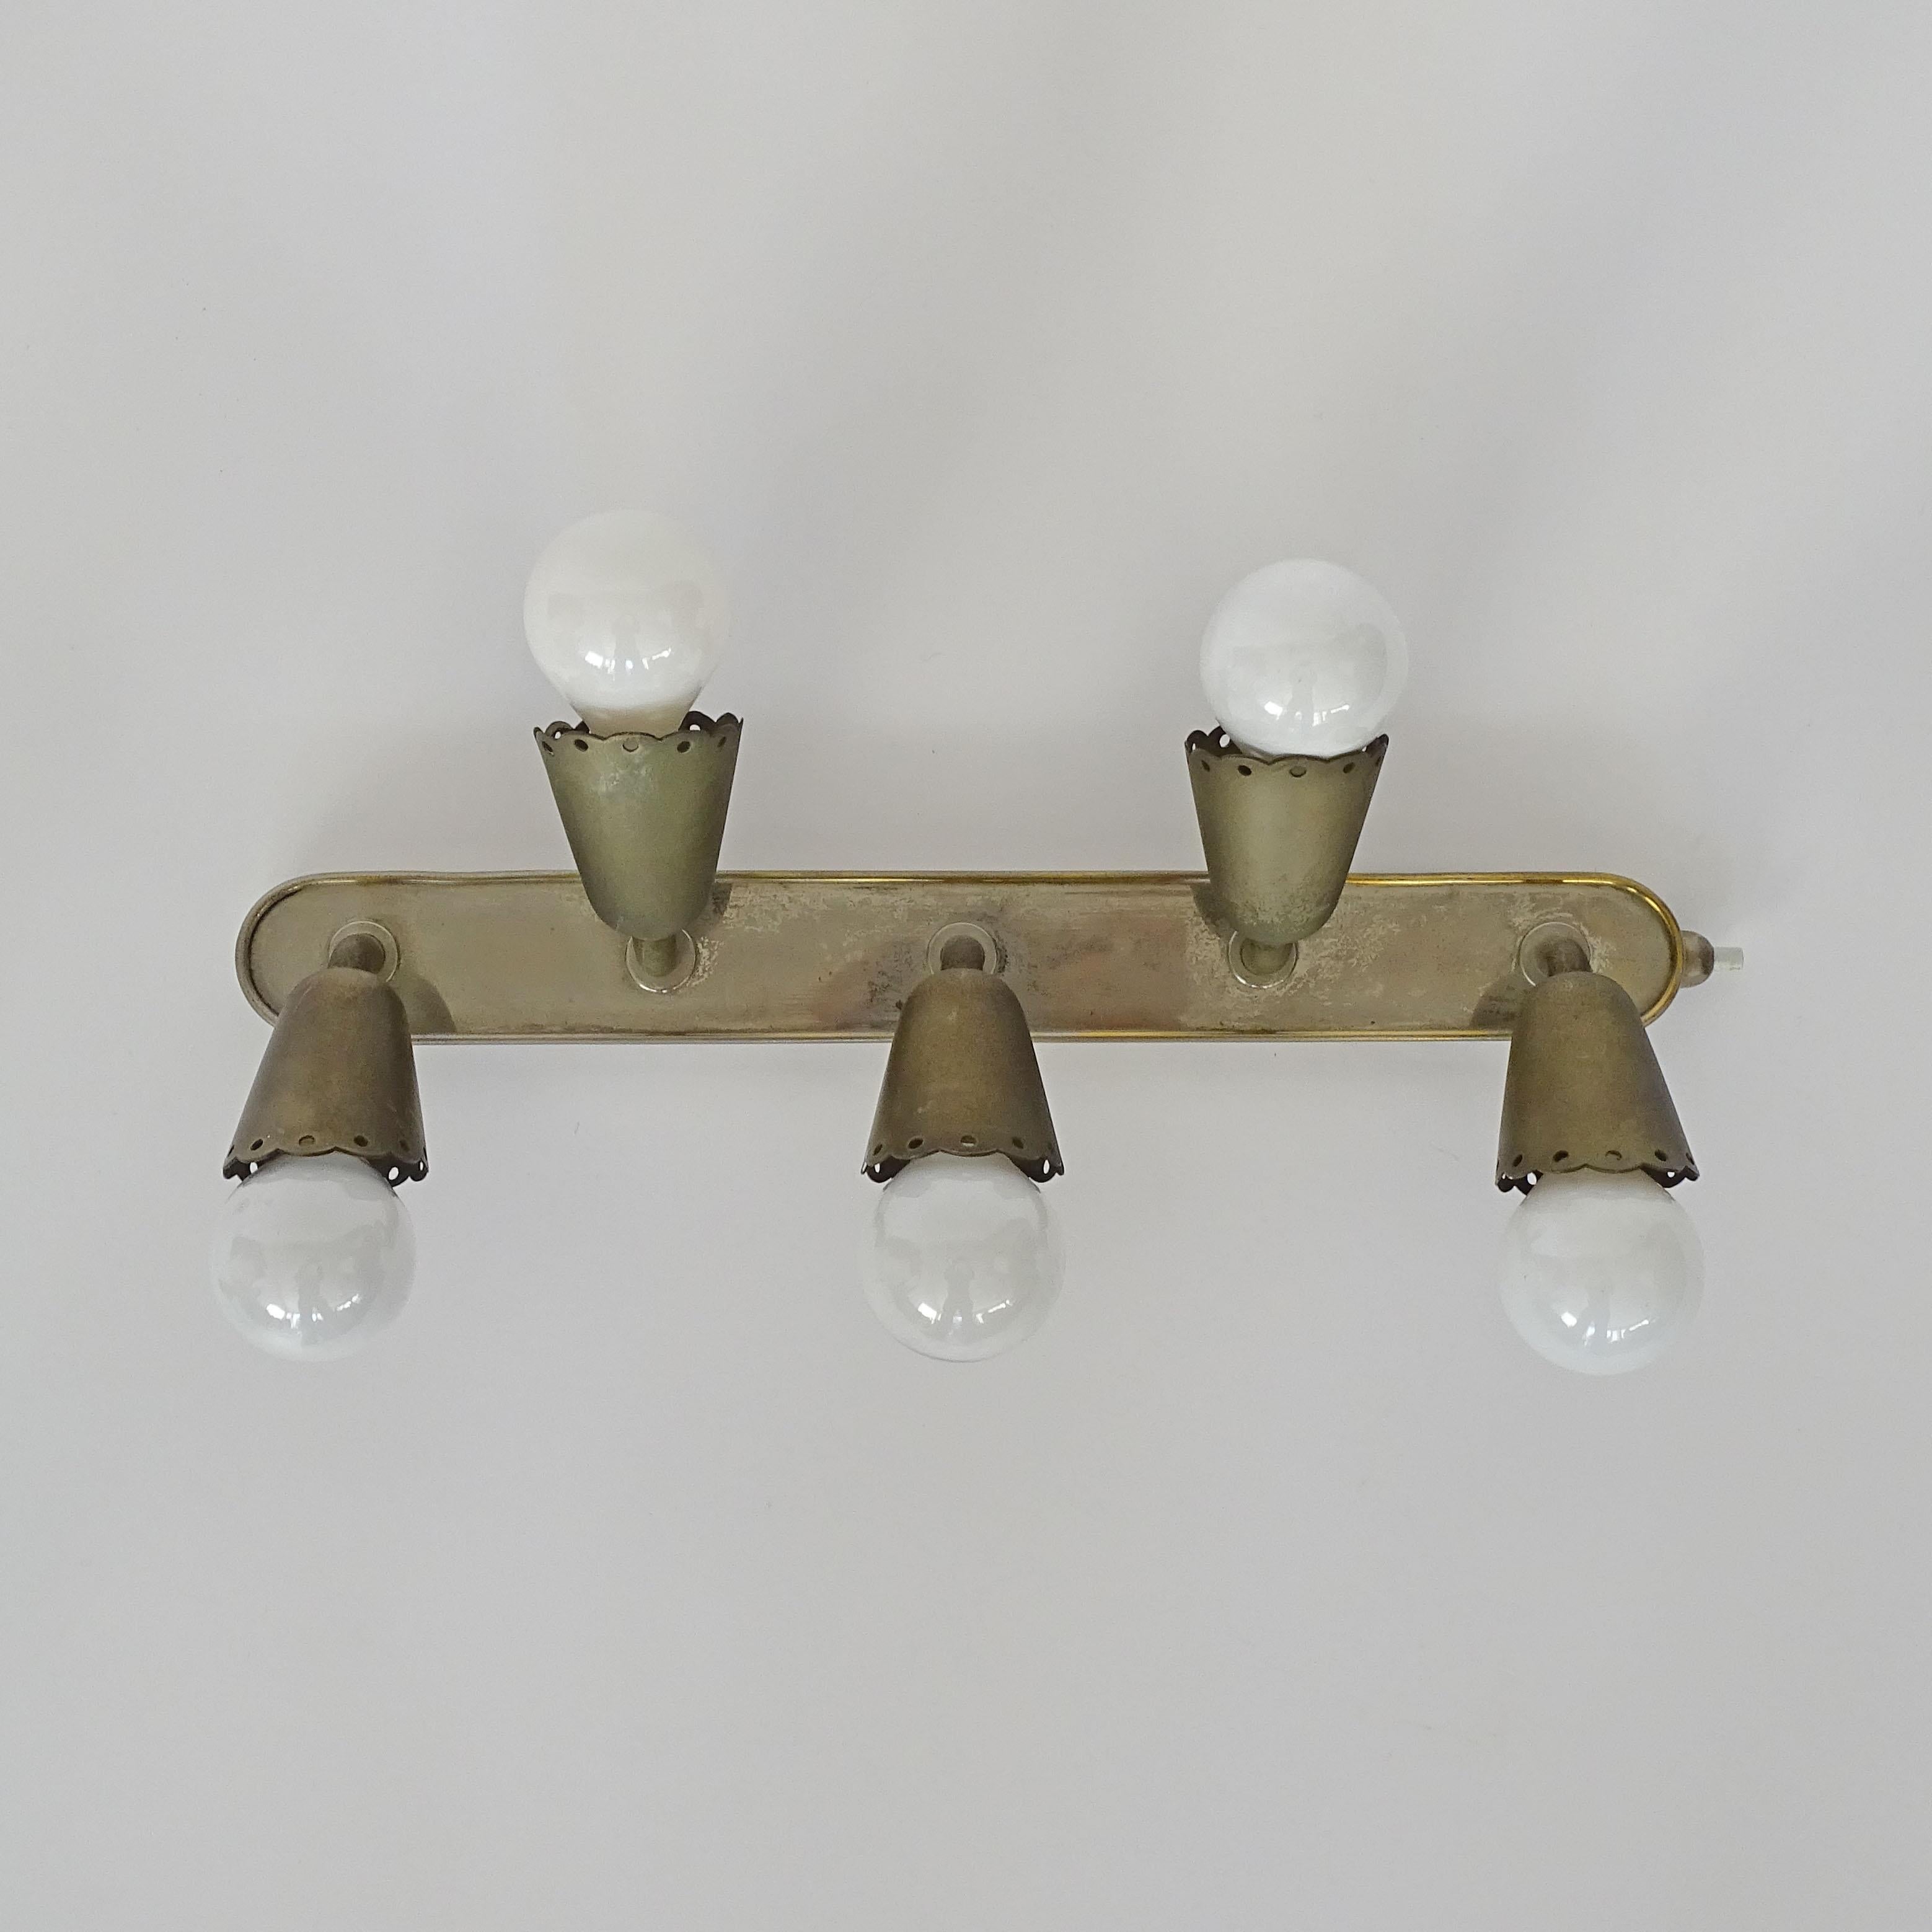 Italian 1930s five-light wall lamp in nickel brass attributed to Fontana Arte.
For use as a bed light or on top of a wall mirror.
